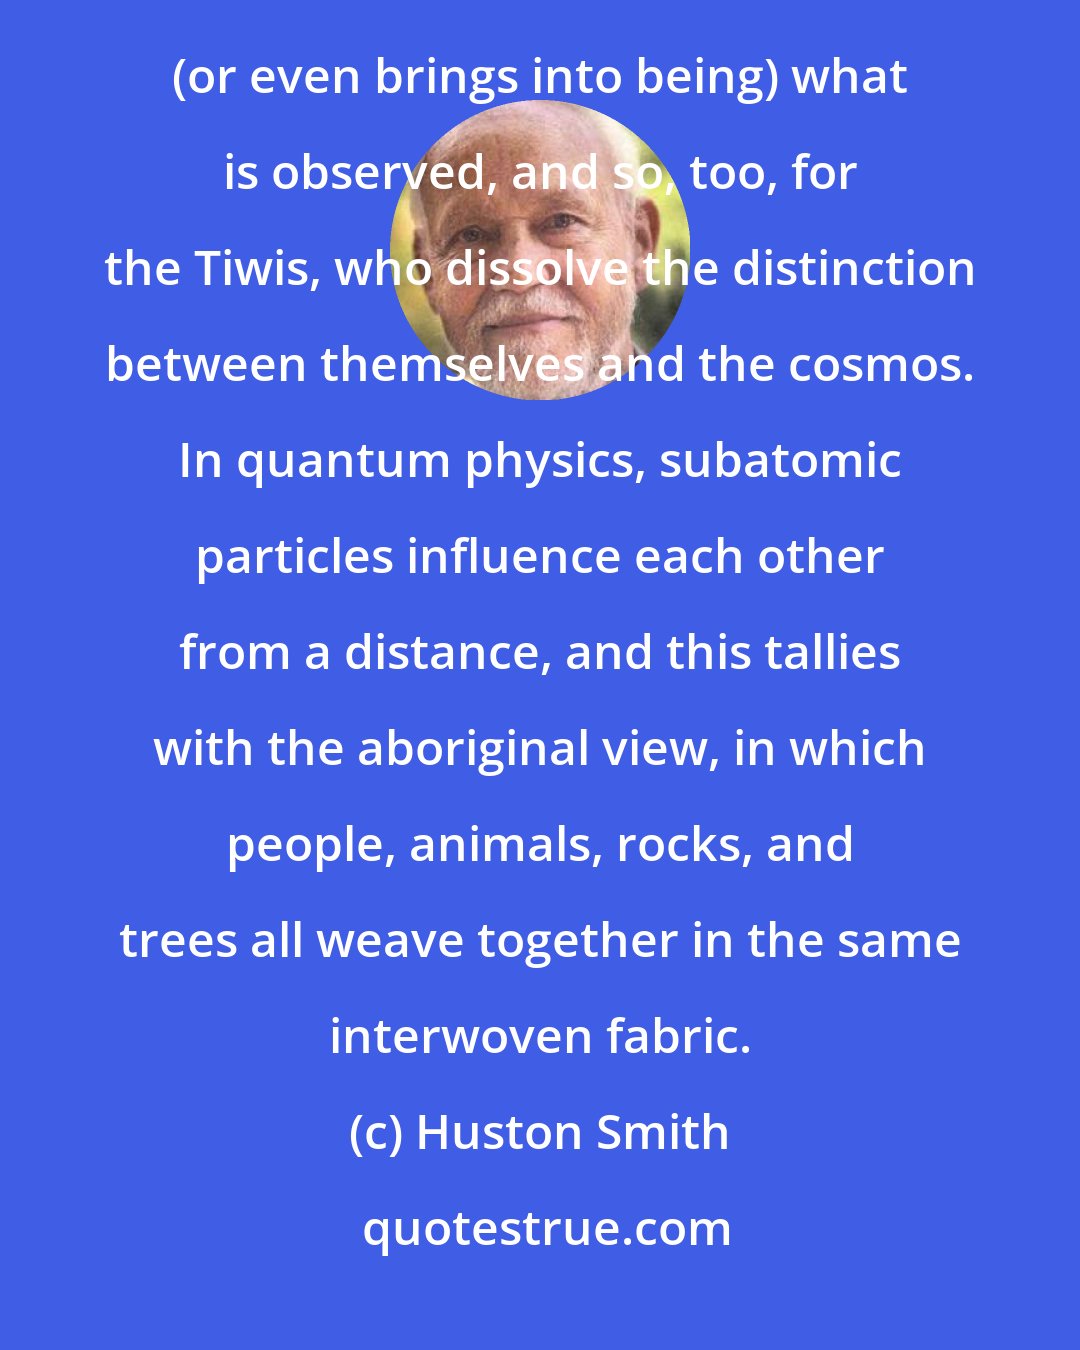 Huston Smith: Ancient wisdom and quantum physicists make unlikely bedfellows: In quantum mechanics the observer determines (or even brings into being) what is observed, and so, too, for the Tiwis, who dissolve the distinction between themselves and the cosmos. In quantum physics, subatomic particles influence each other from a distance, and this tallies with the aboriginal view, in which people, animals, rocks, and trees all weave together in the same interwoven fabric.